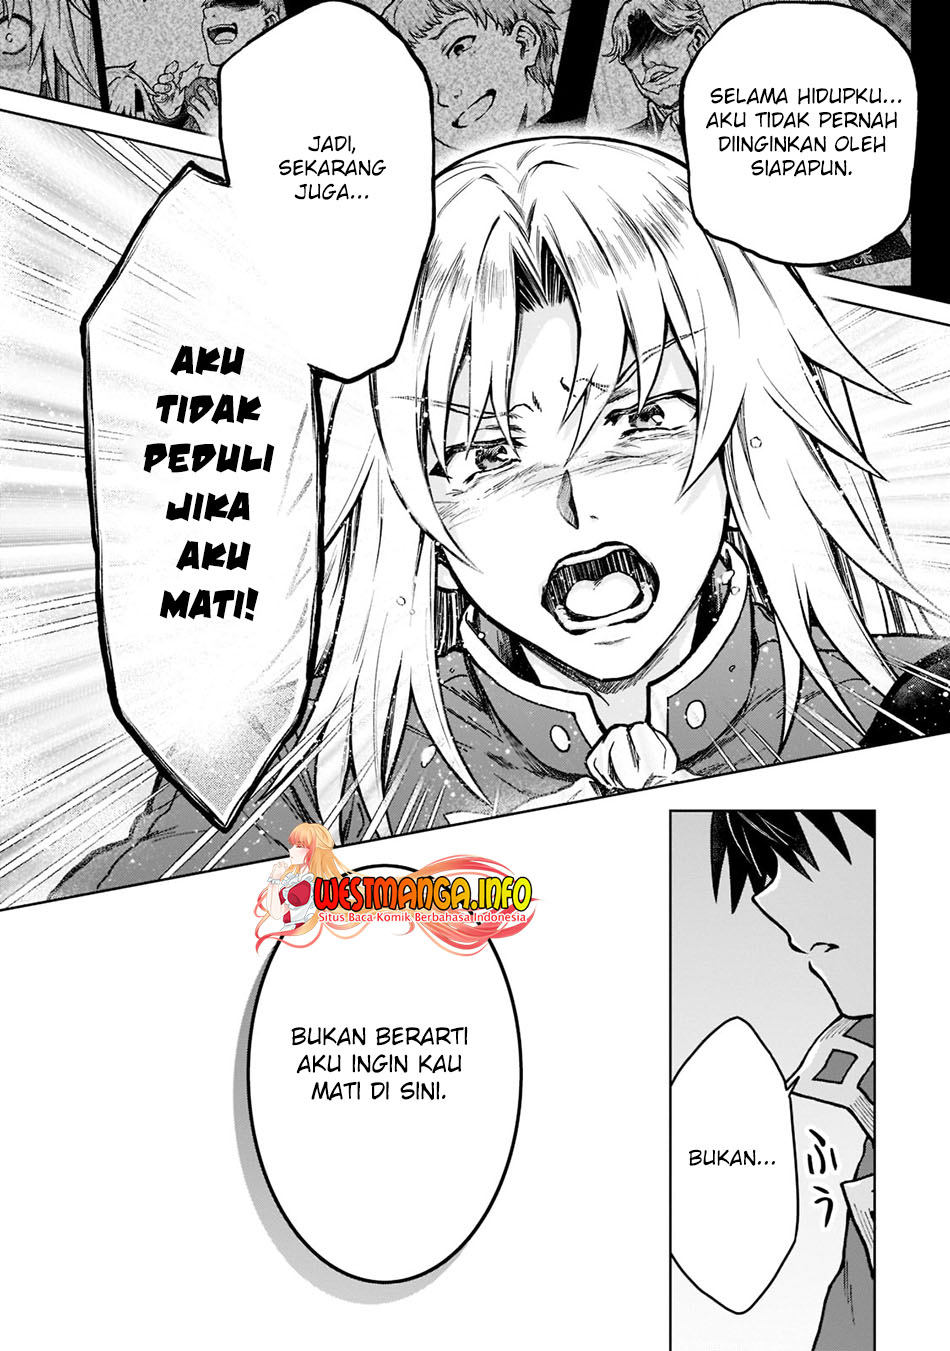 Dilarang COPAS - situs resmi www.mangacanblog.com - Komik d rank adventurer invited by a brave party and the stalking princess 011 - chapter 11 12 Indonesia d rank adventurer invited by a brave party and the stalking princess 011 - chapter 11 Terbaru 20|Baca Manga Komik Indonesia|Mangacan